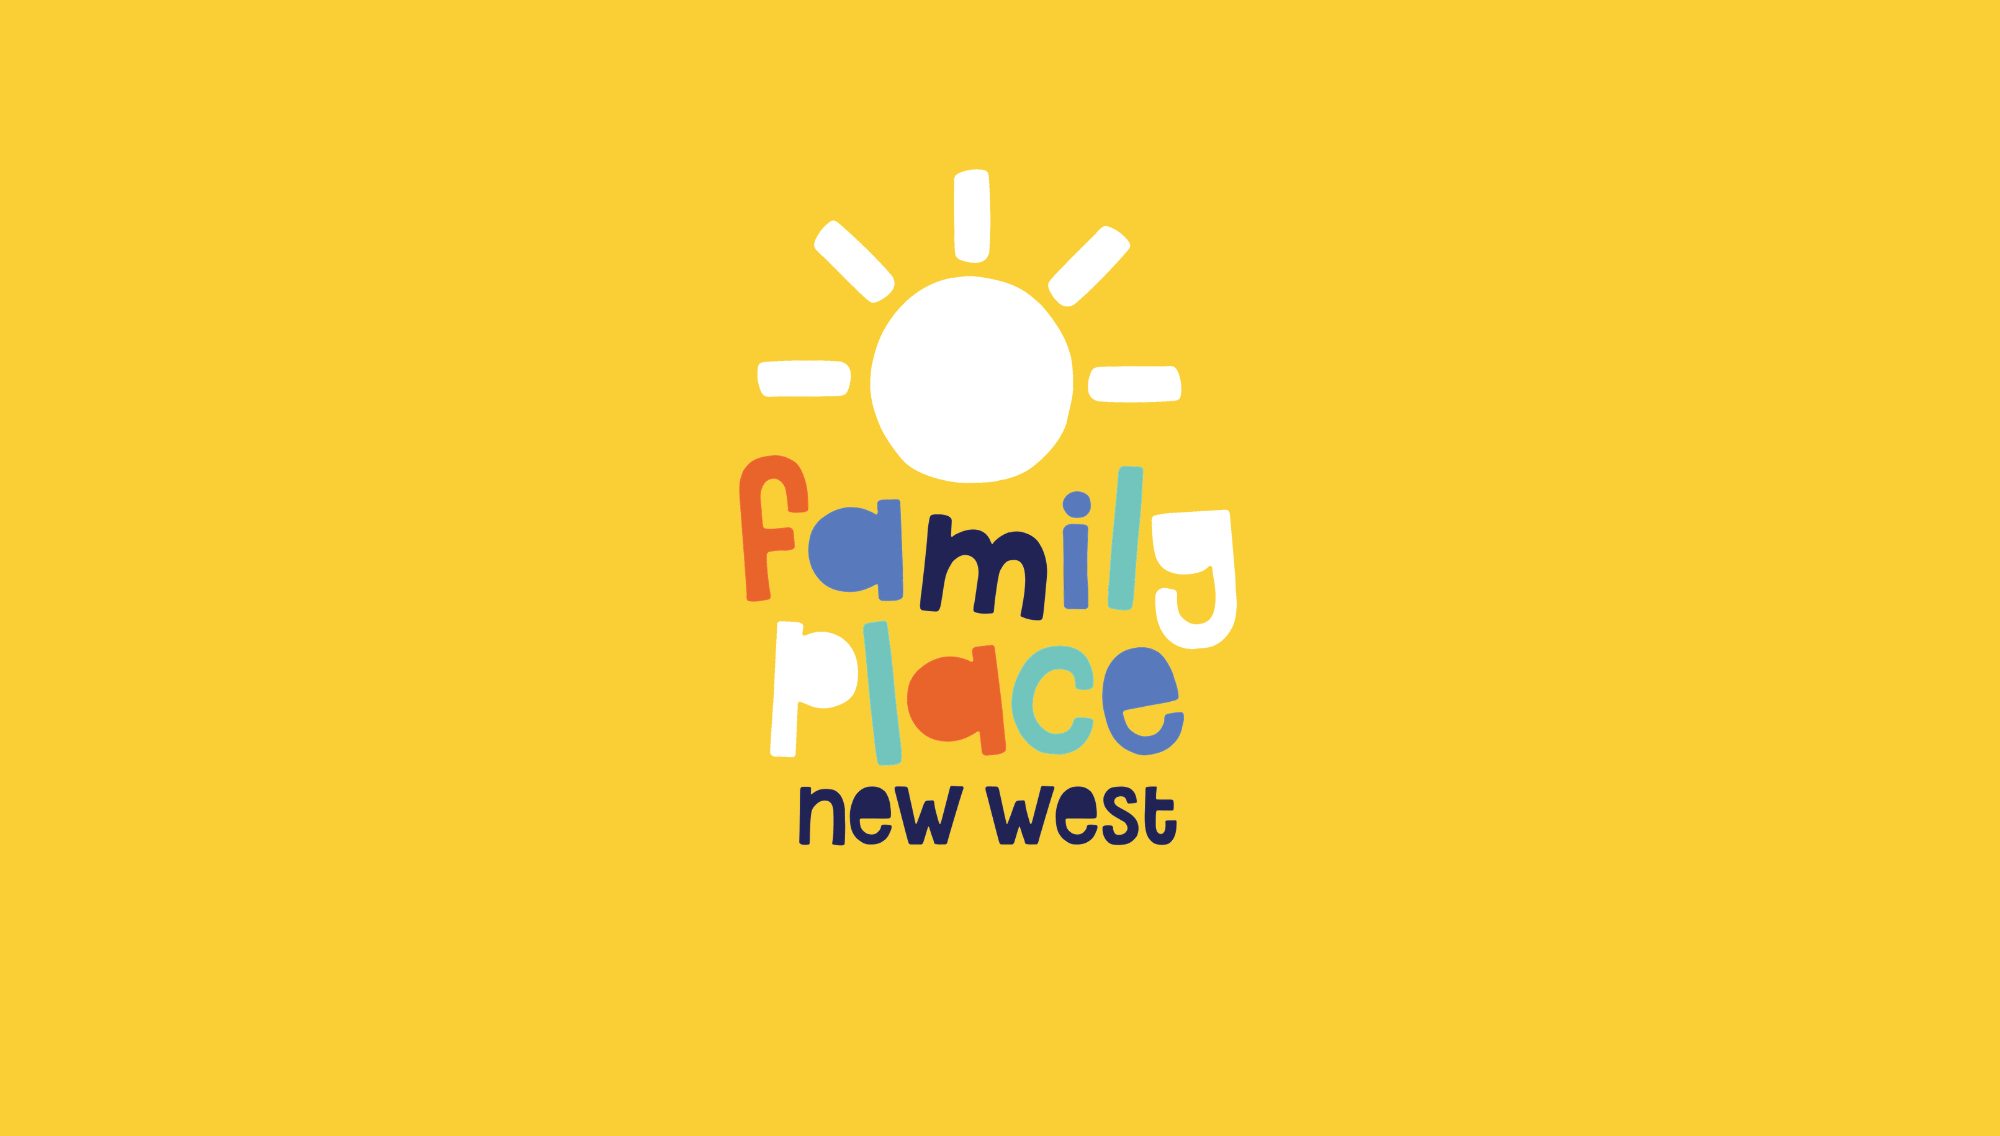 New Westminster Family Place